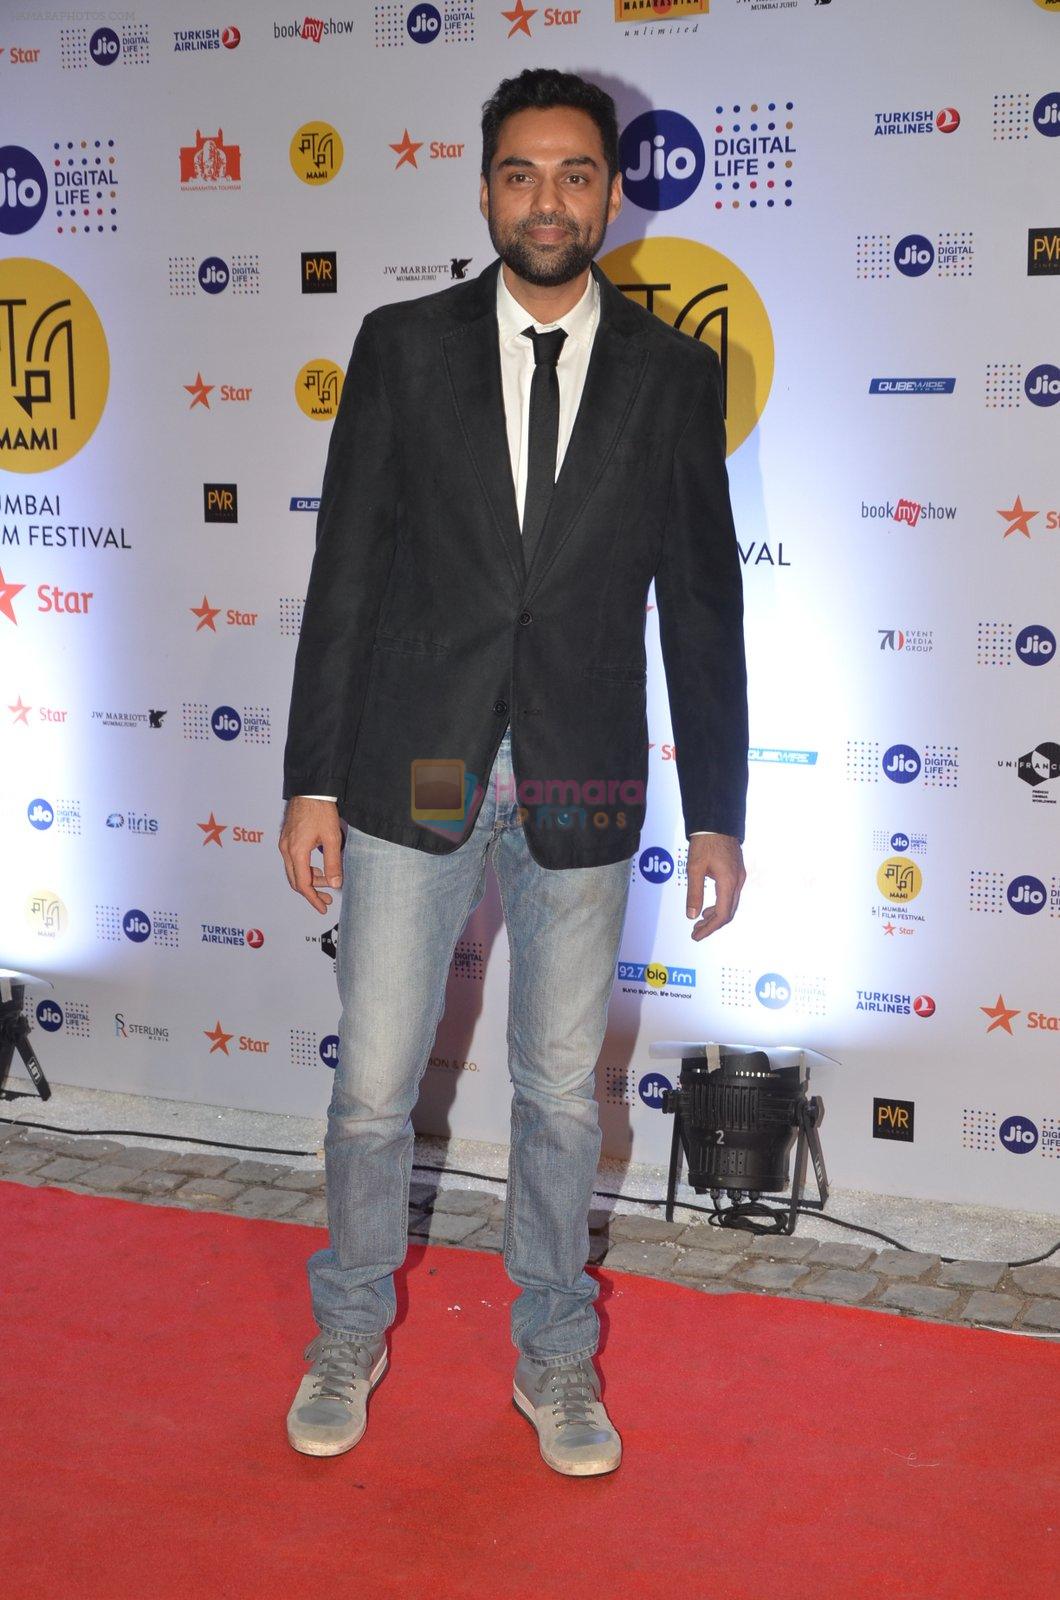 Abhay Deol at MAMI Film Festival 2016 on 20th Oct 2016